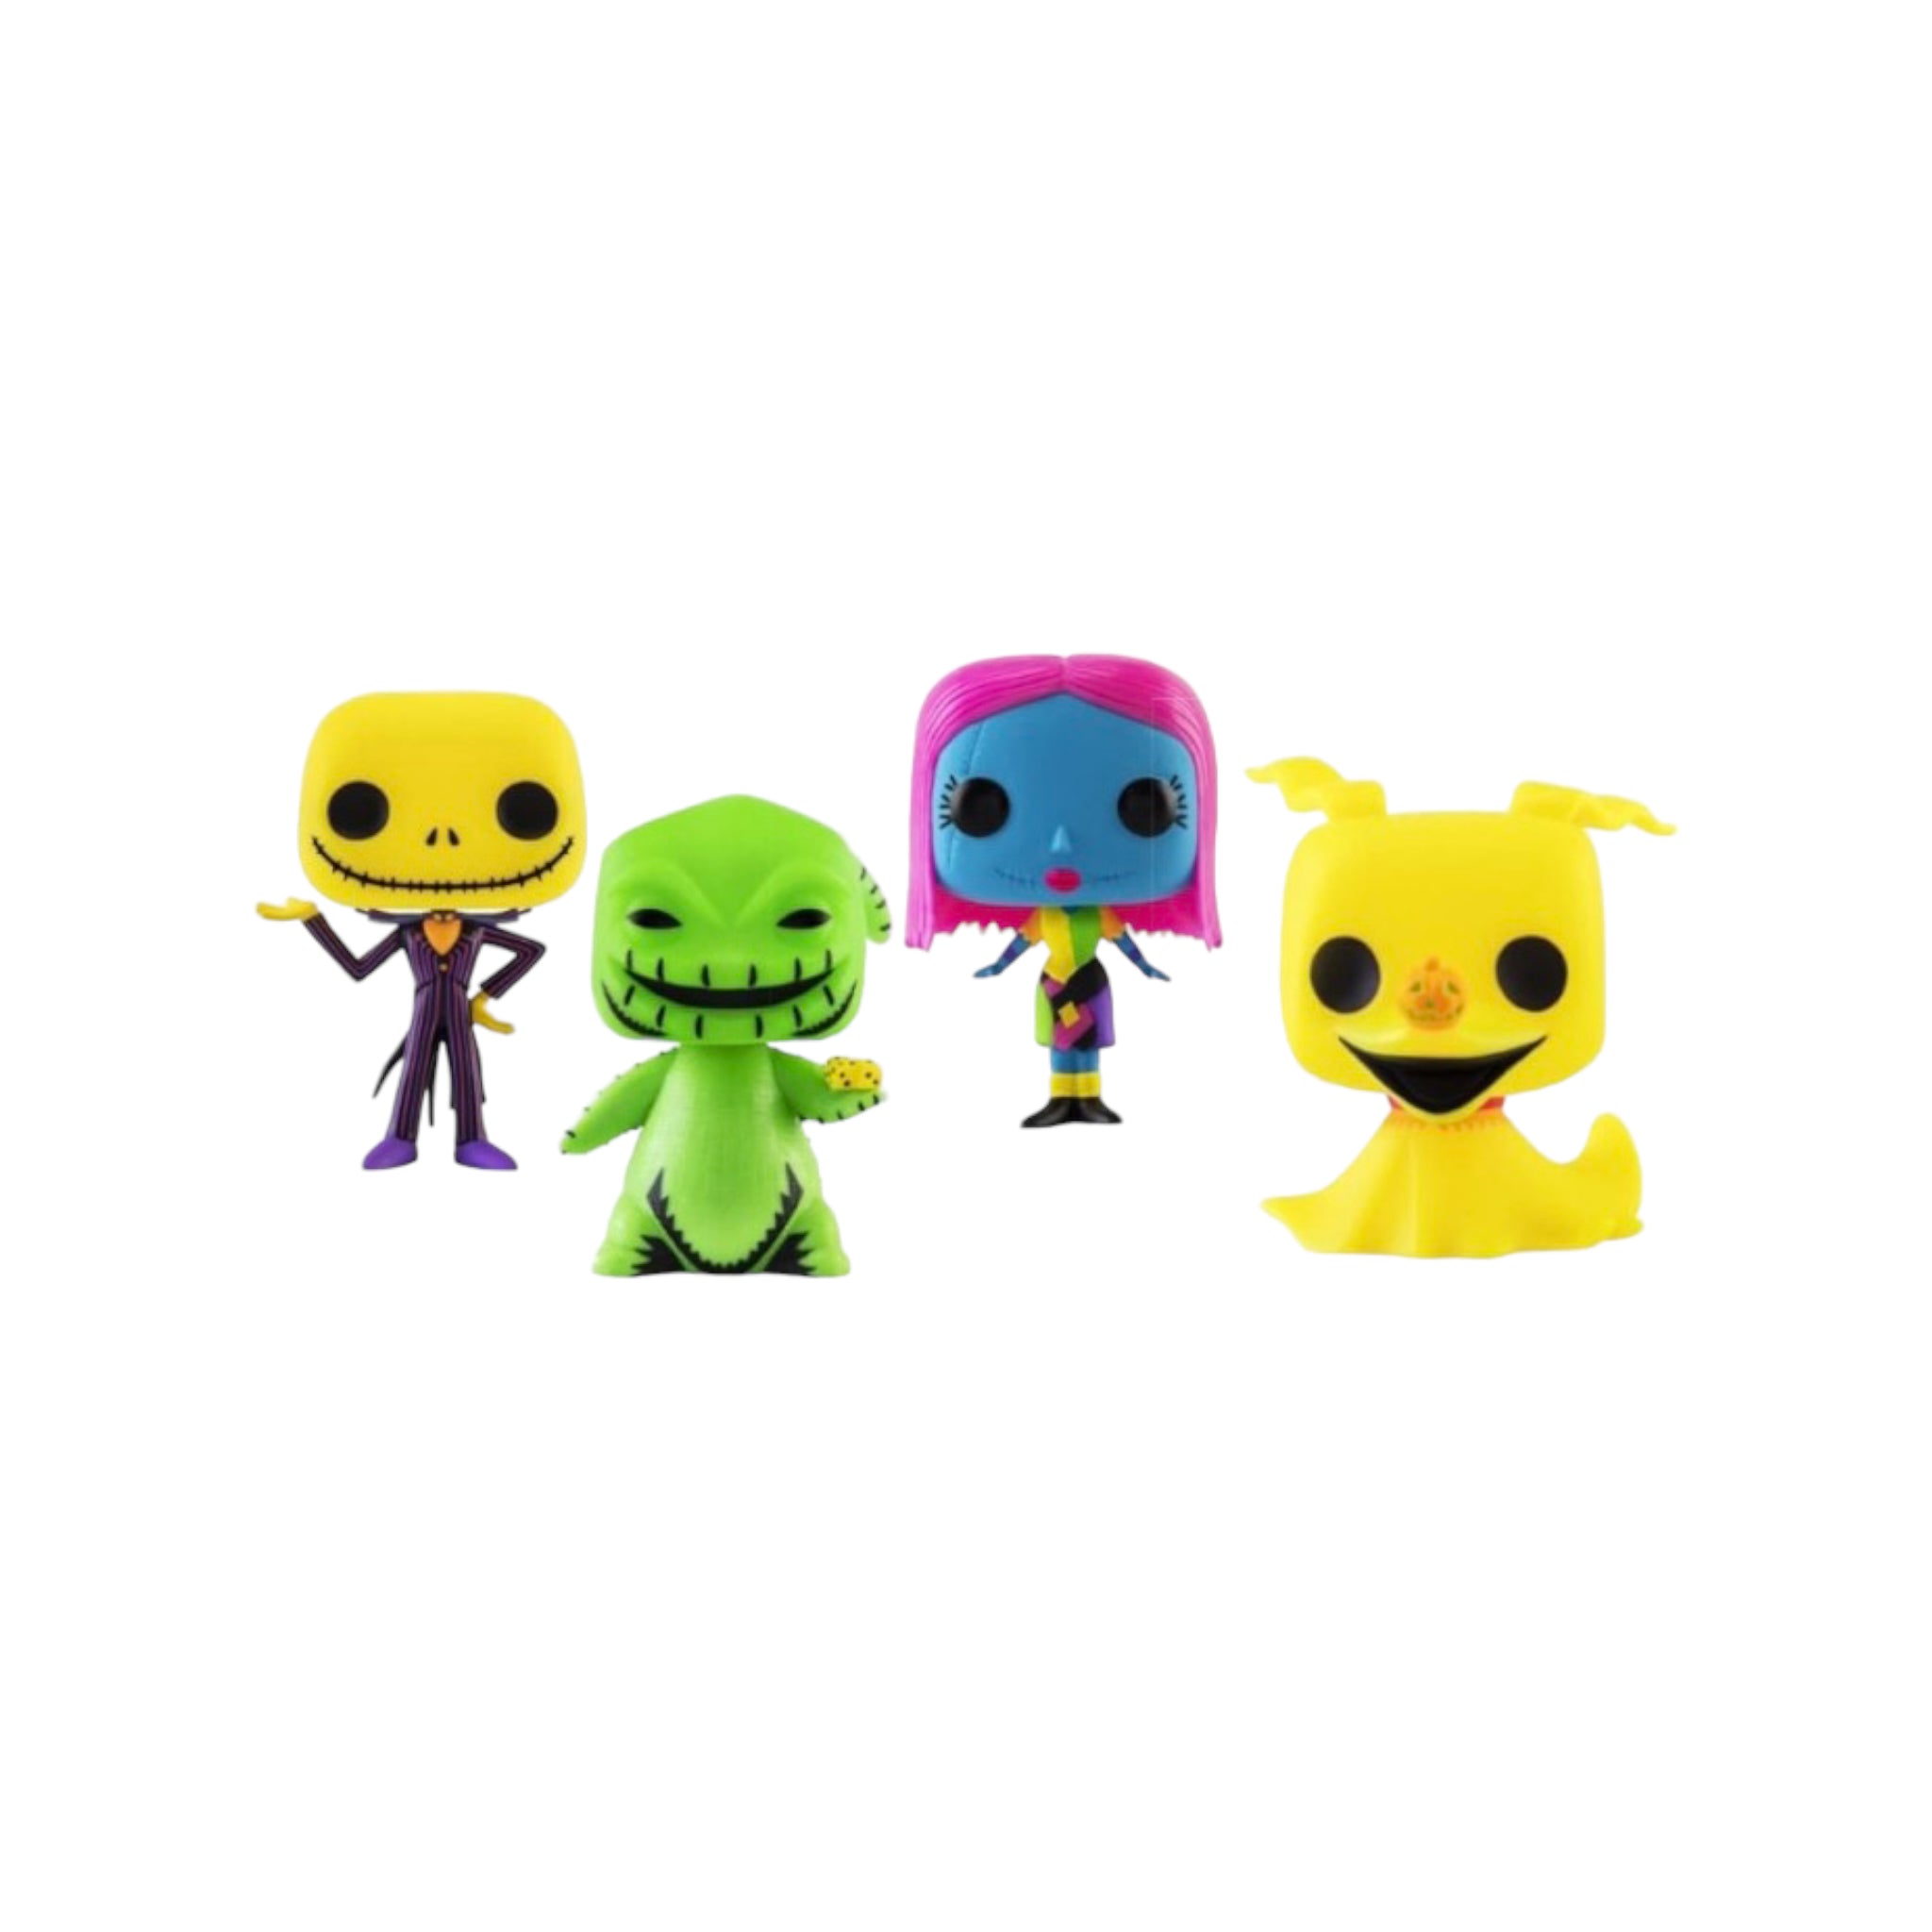 Jack Skellington / Oogie Boogie / Sally / Zero (Black Light) 4 Pack Funko Pop! - The Nightmare Before Christmas - Special Edition - Condition 8.5/10